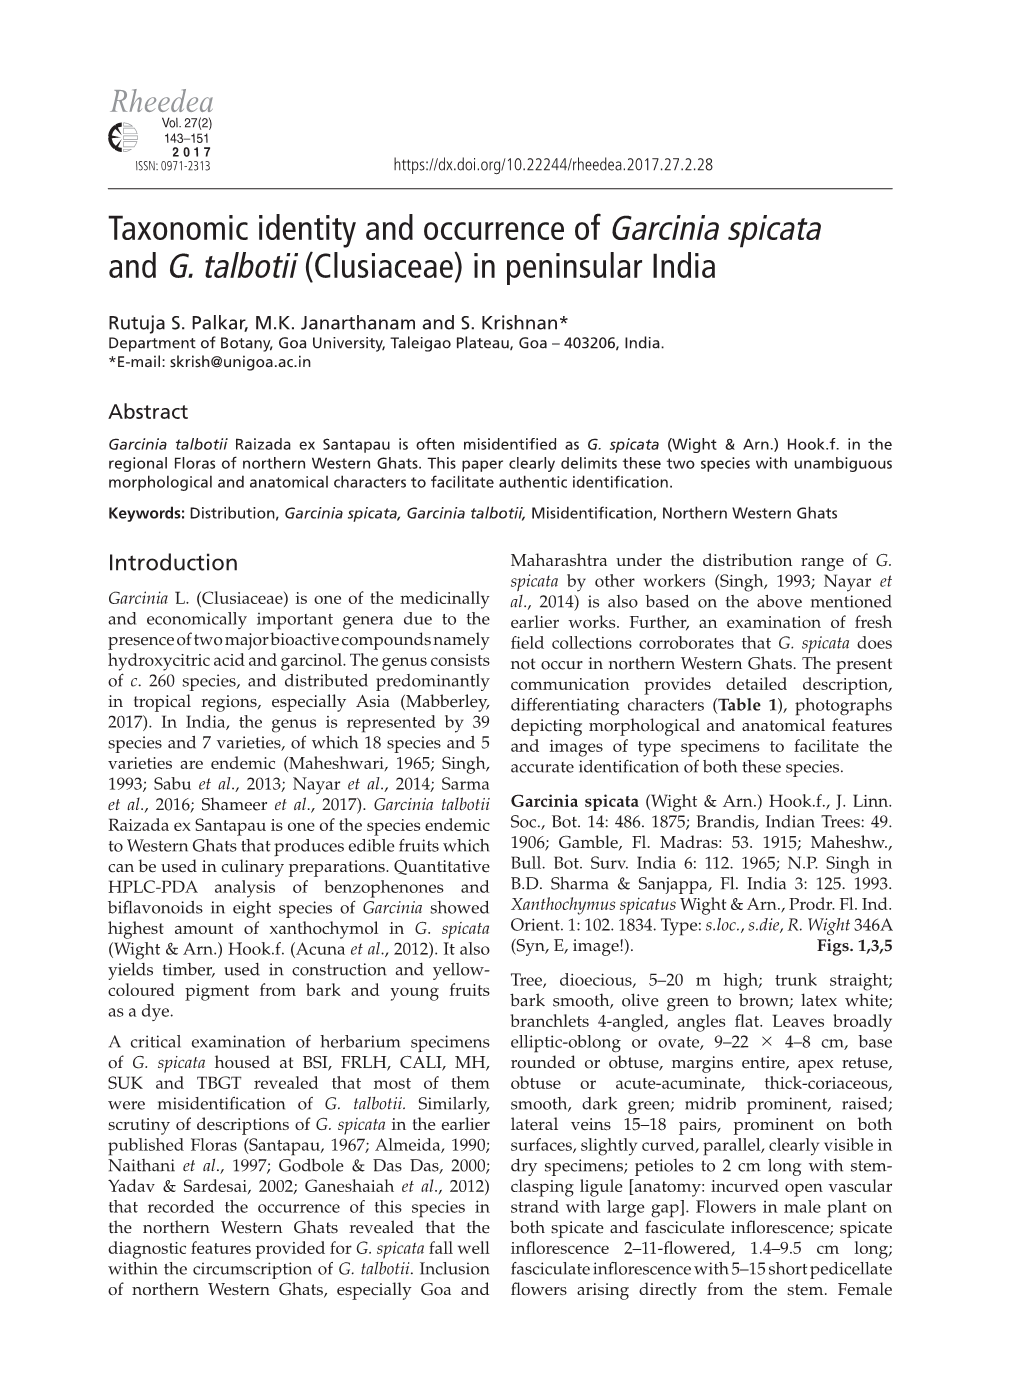 Taxonomic Identity and Occurrence of Garcinia Spicata and G. Talbotii (Clusiaceae) in Peninsular India